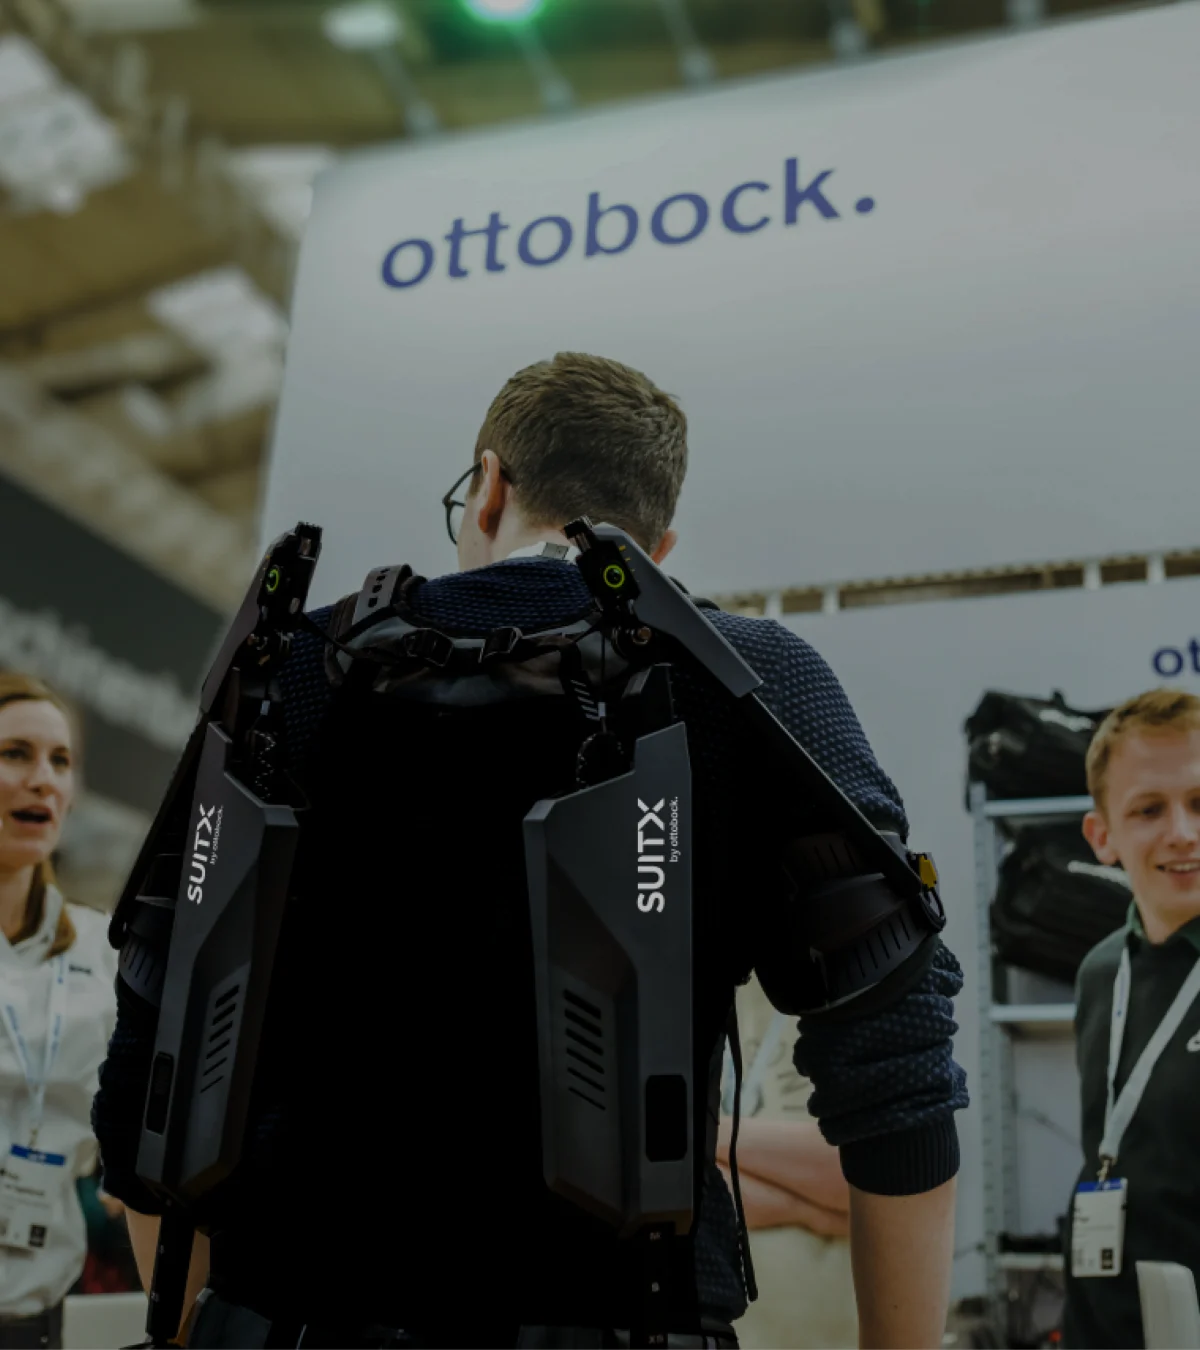 Rear view of a male person wearing a SUITX exoskeleton at a trade show and talking to a woman to his left